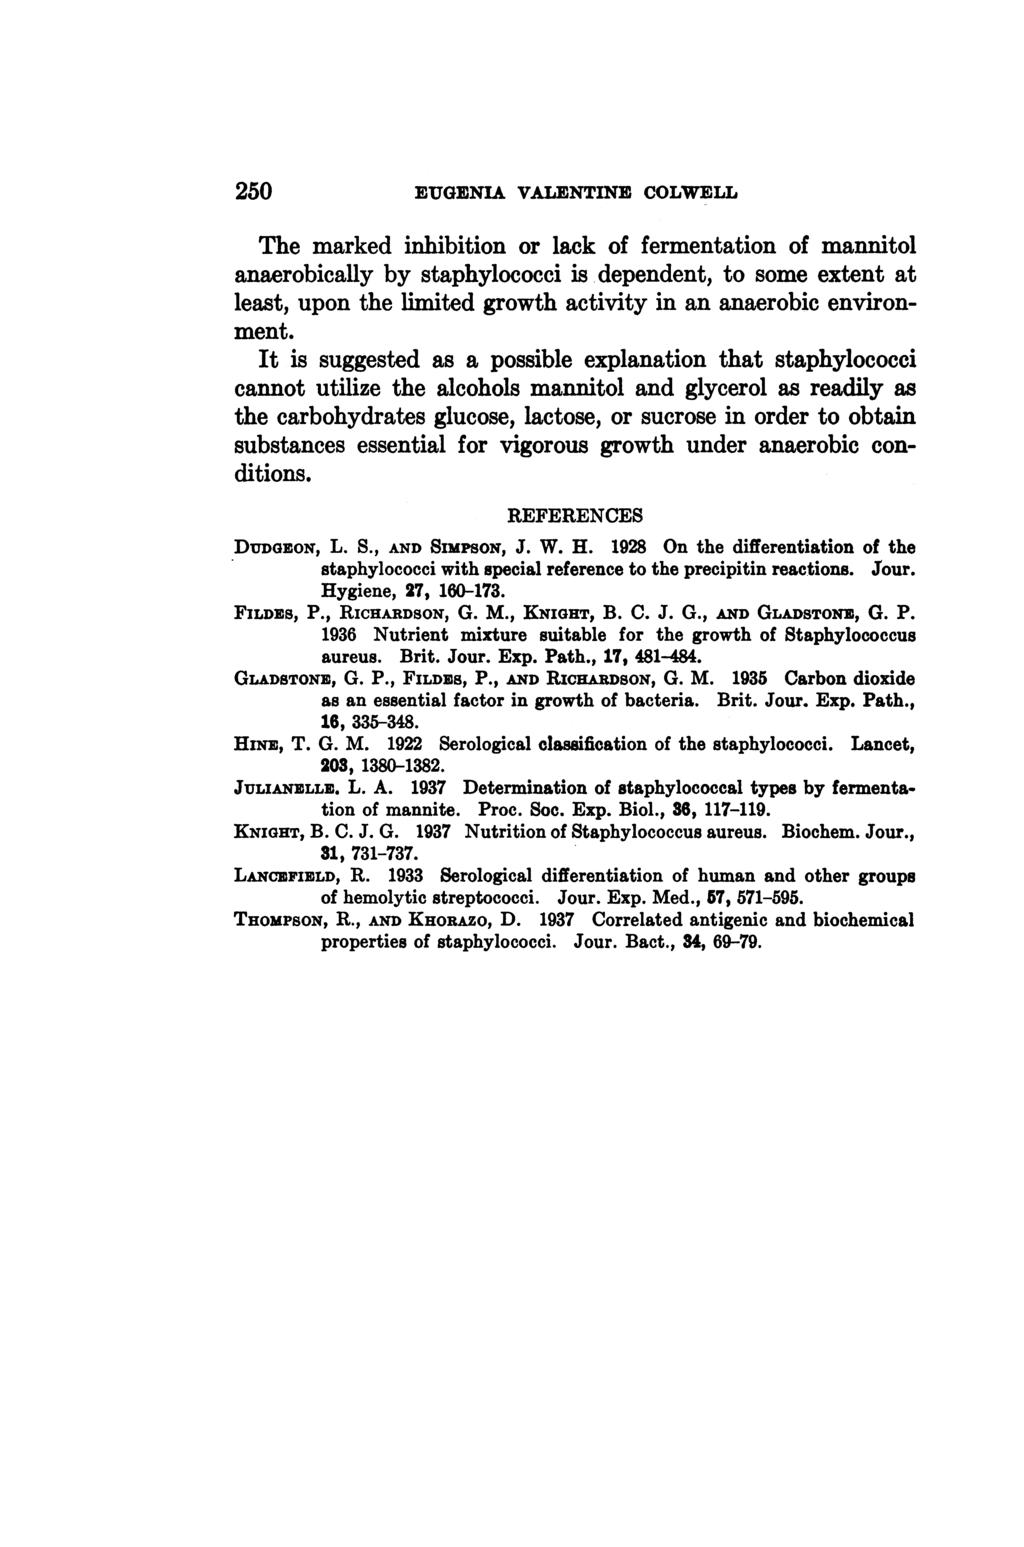 250 EUGENIA VALENTINE COLWELL The marked inhibition or lack of fermentation of mannitol anaerobically by staphylococci is dependent, to some extent at least, upon the limited growth activity in an